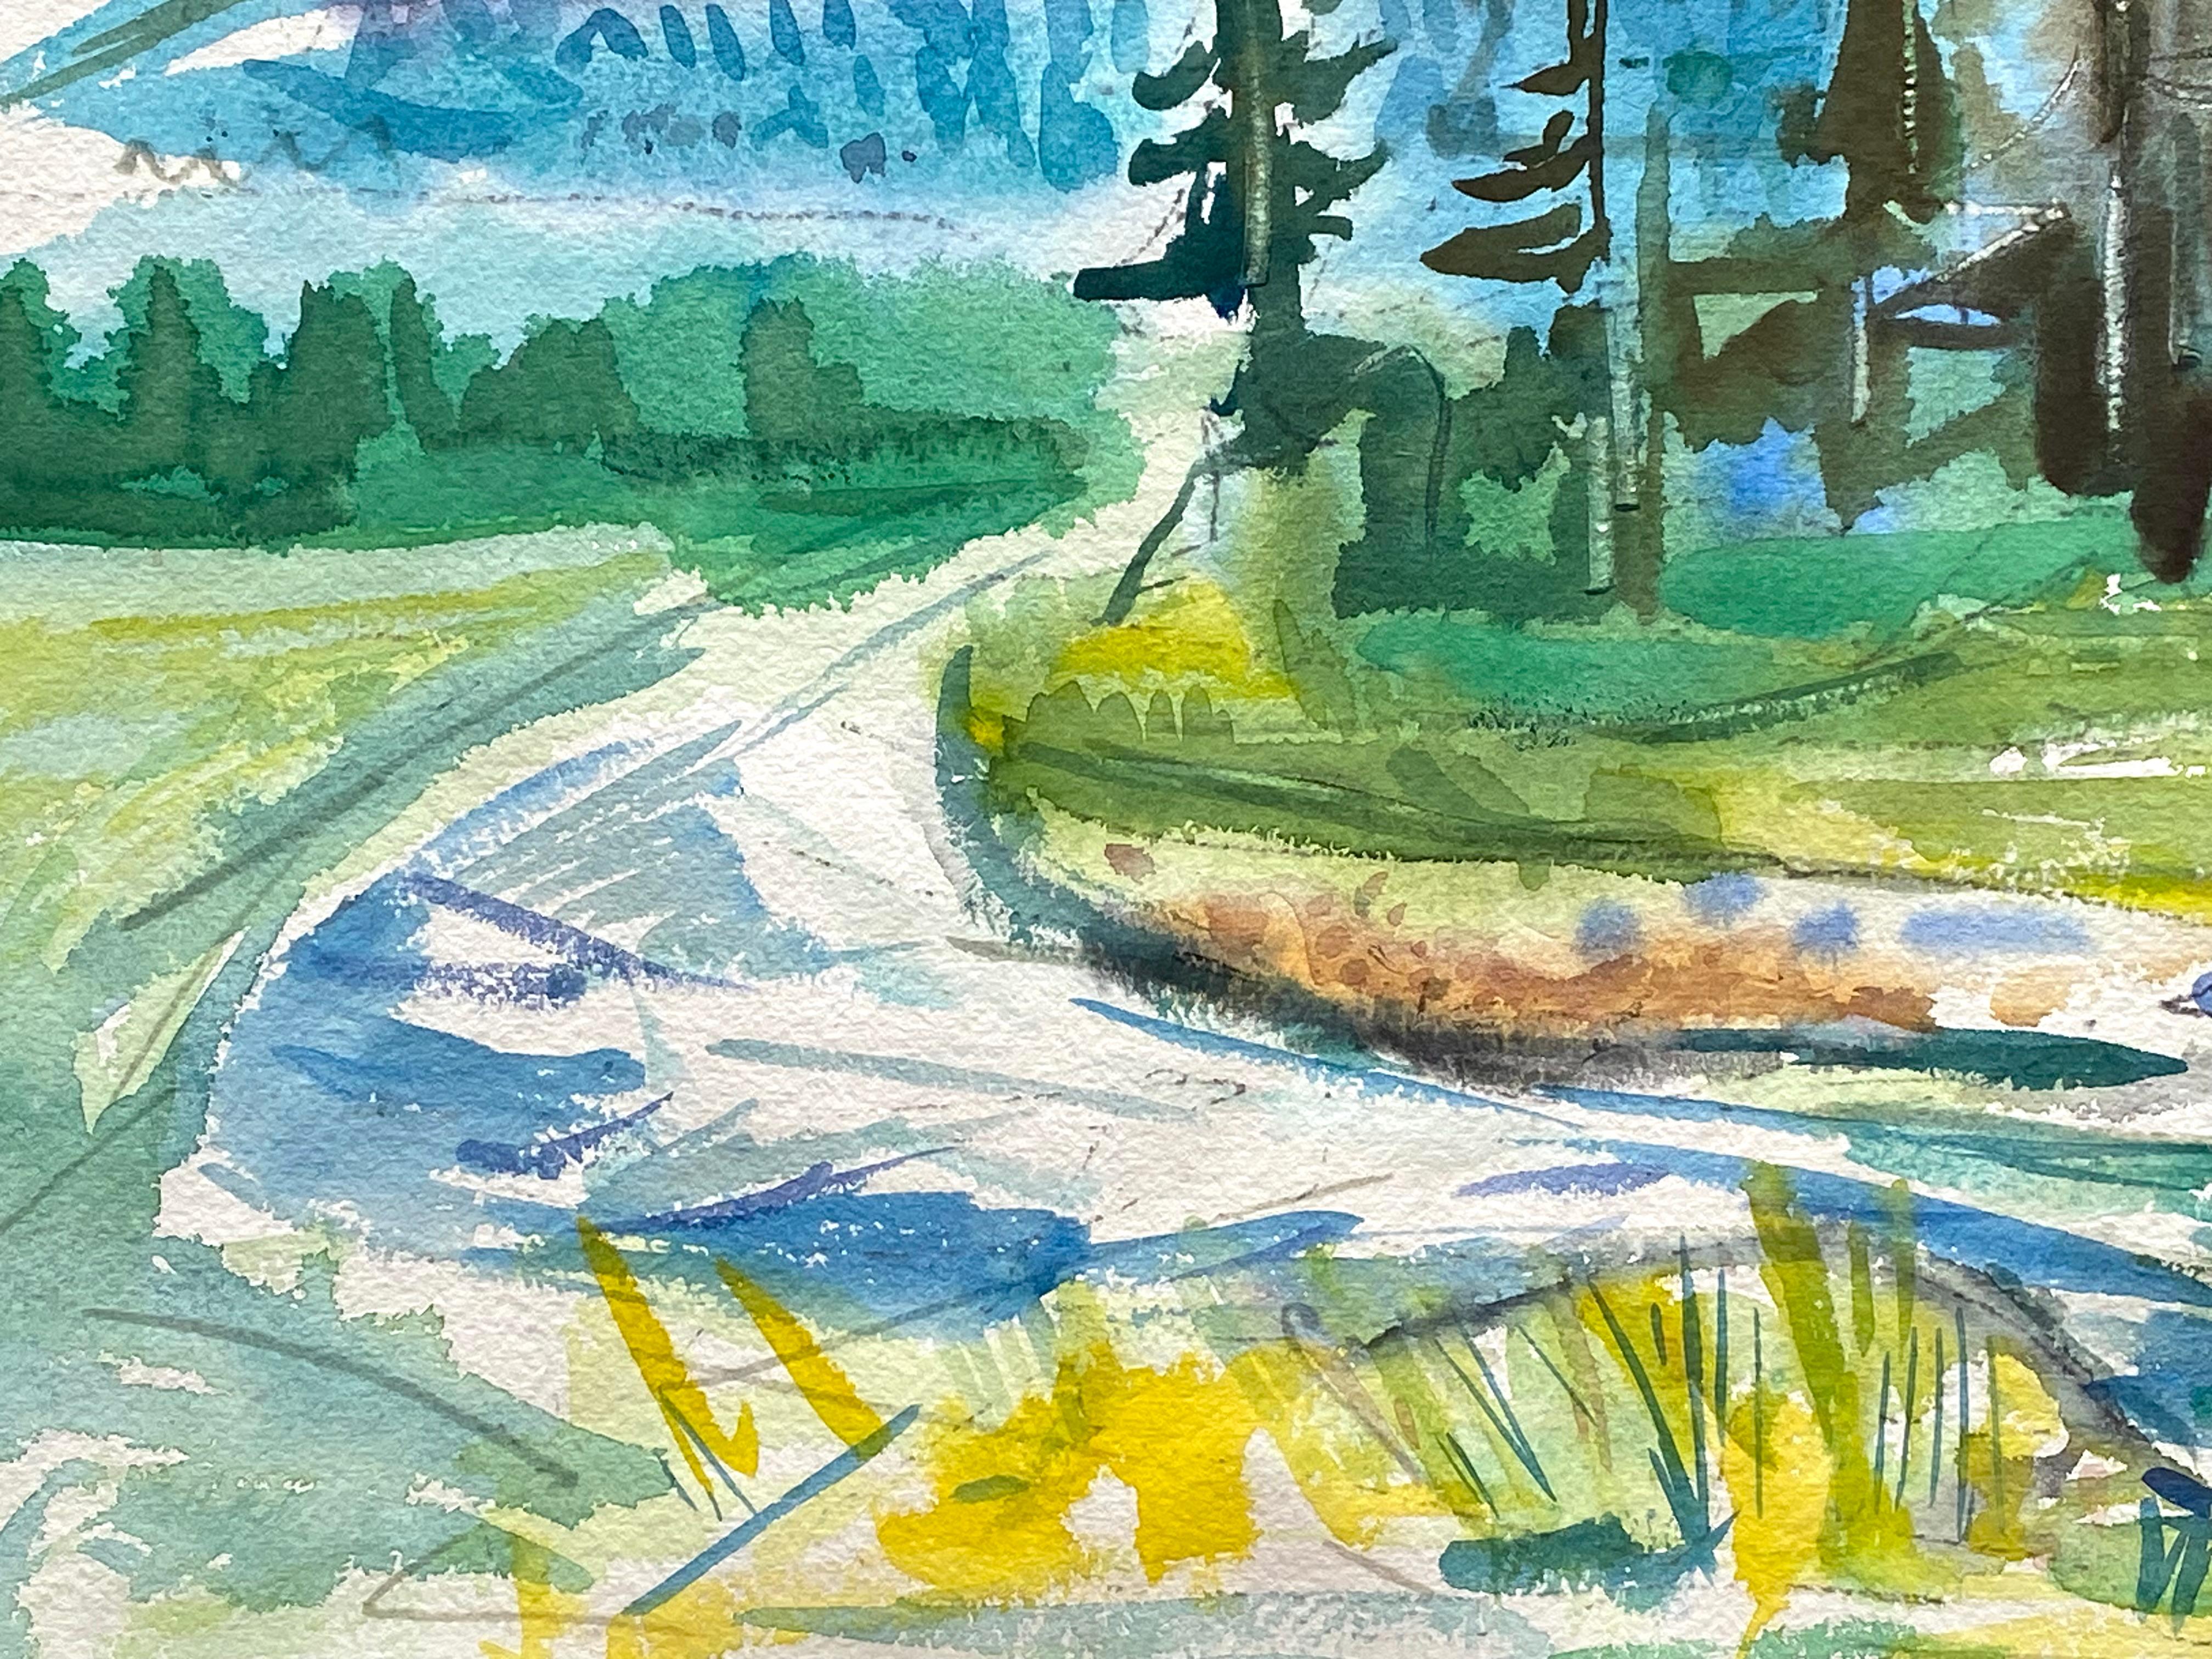 “Rocky Mountain Meadow” - Art by Werner Drewes